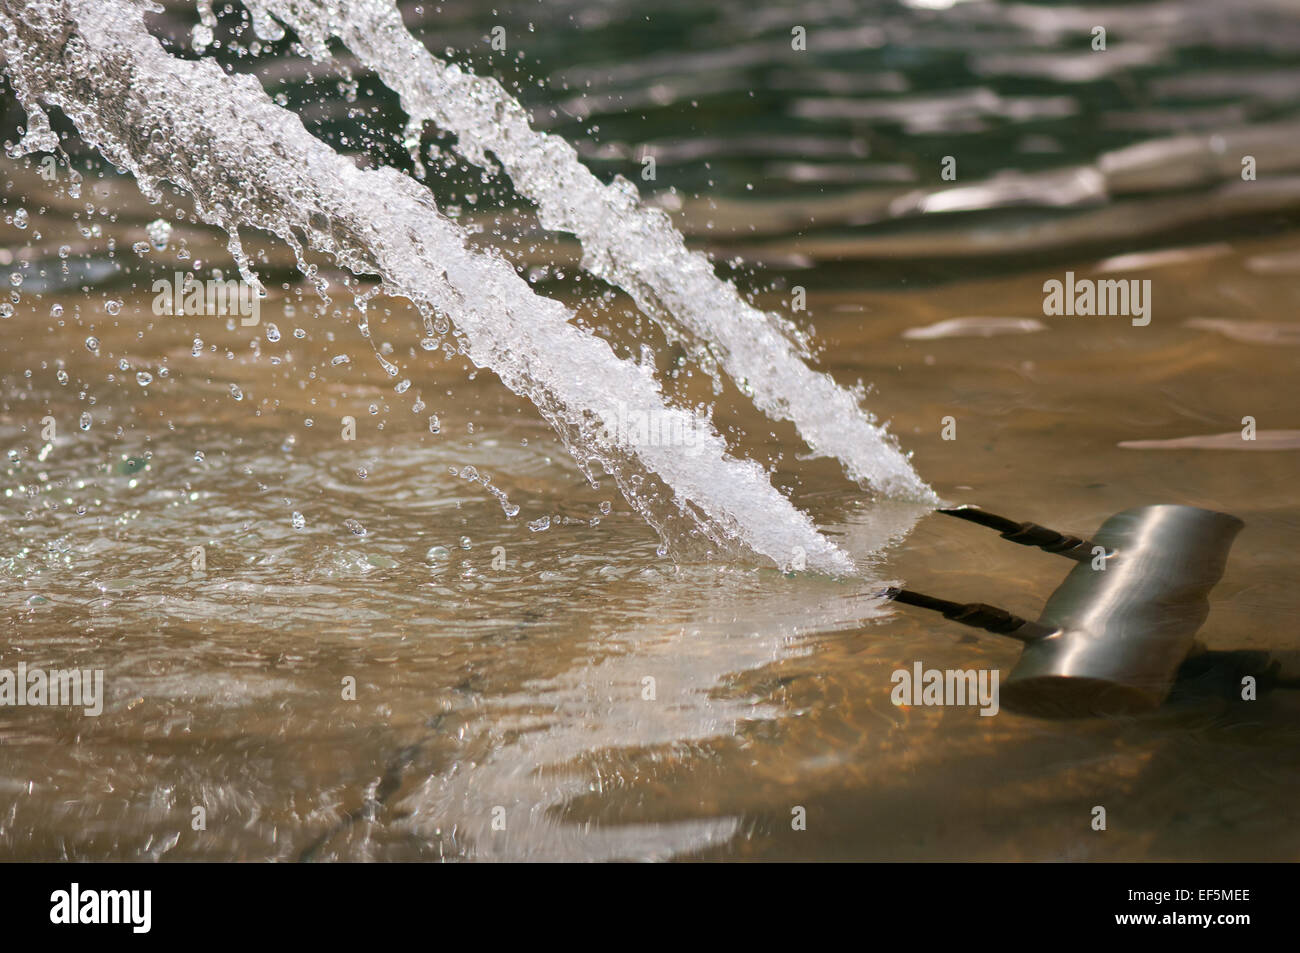 Fountain water gush nozzle device detail Stock Photo